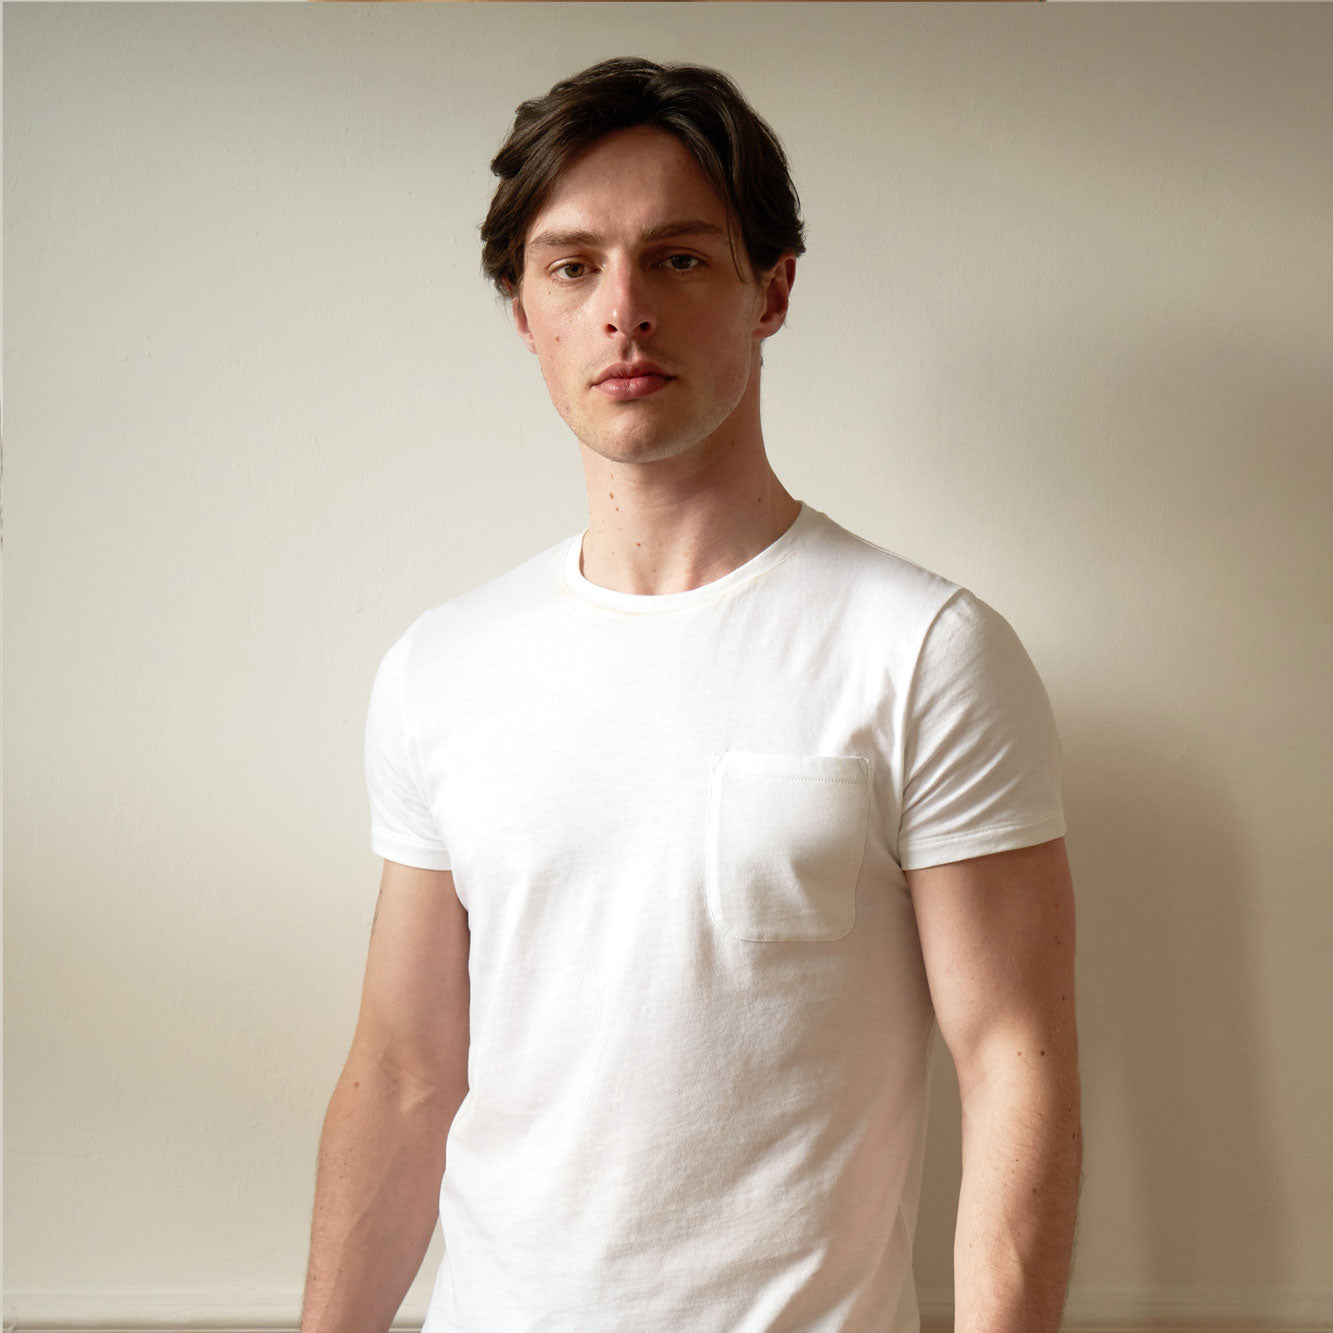 Single Pocket White T shirt. Slim fitting. On Male model size small with dark hair. front view